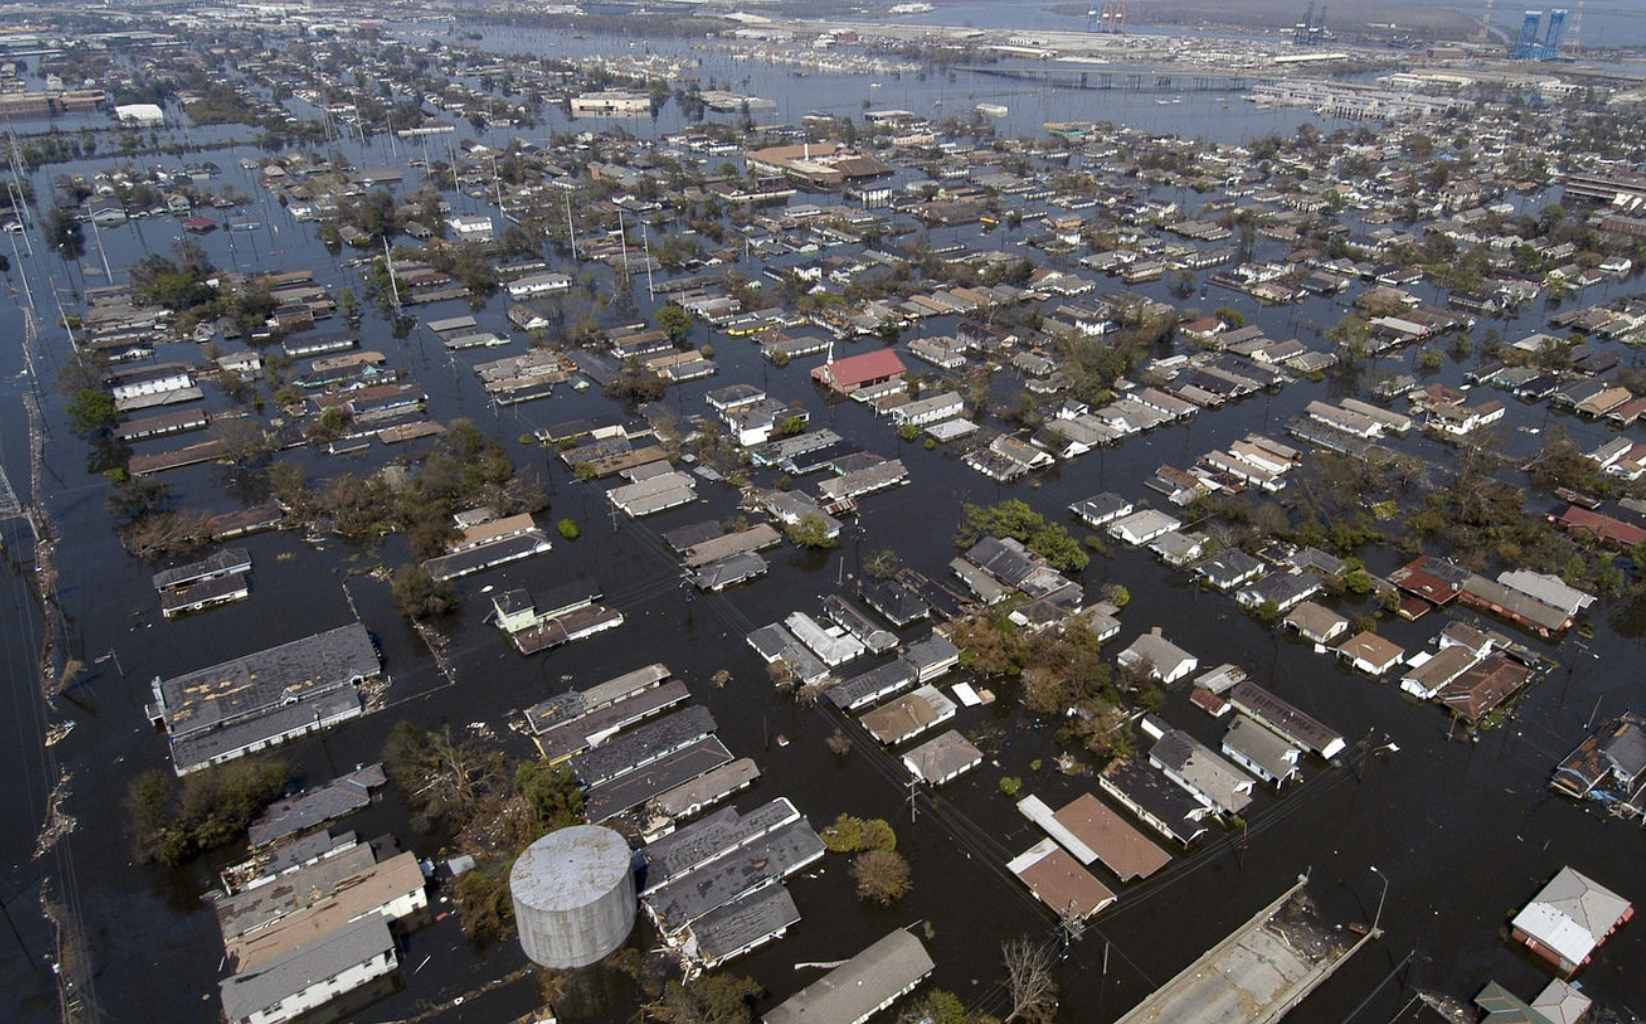 New Orleans flooding, aerial view